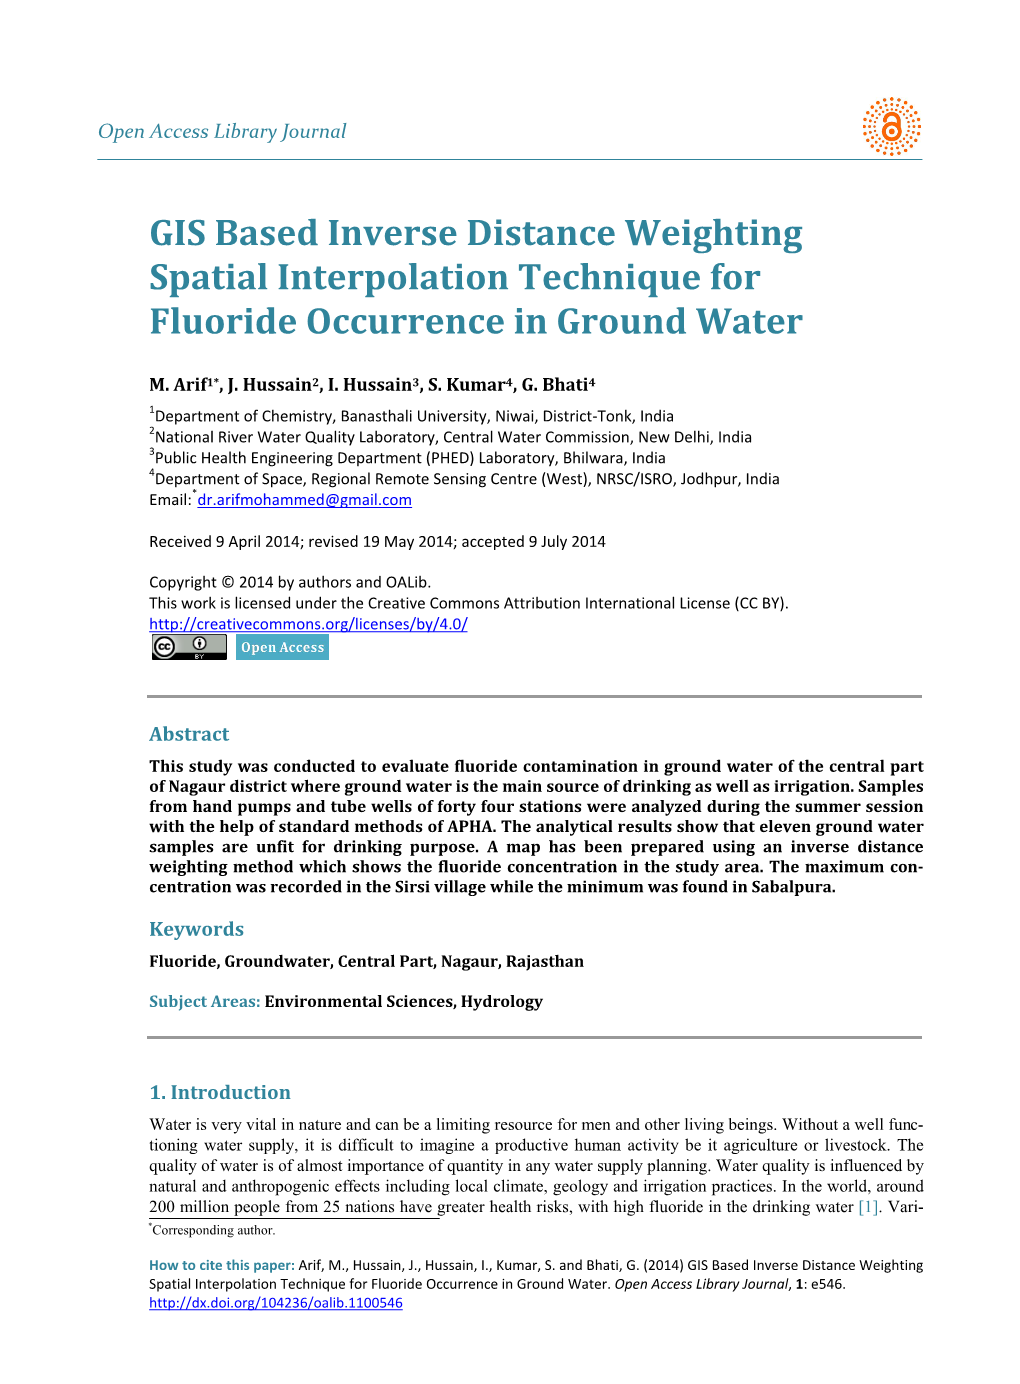 GIS Based Inverse Distance Weighting Spatial Interpolation Technique for Fluoride Occurrence in Ground Water